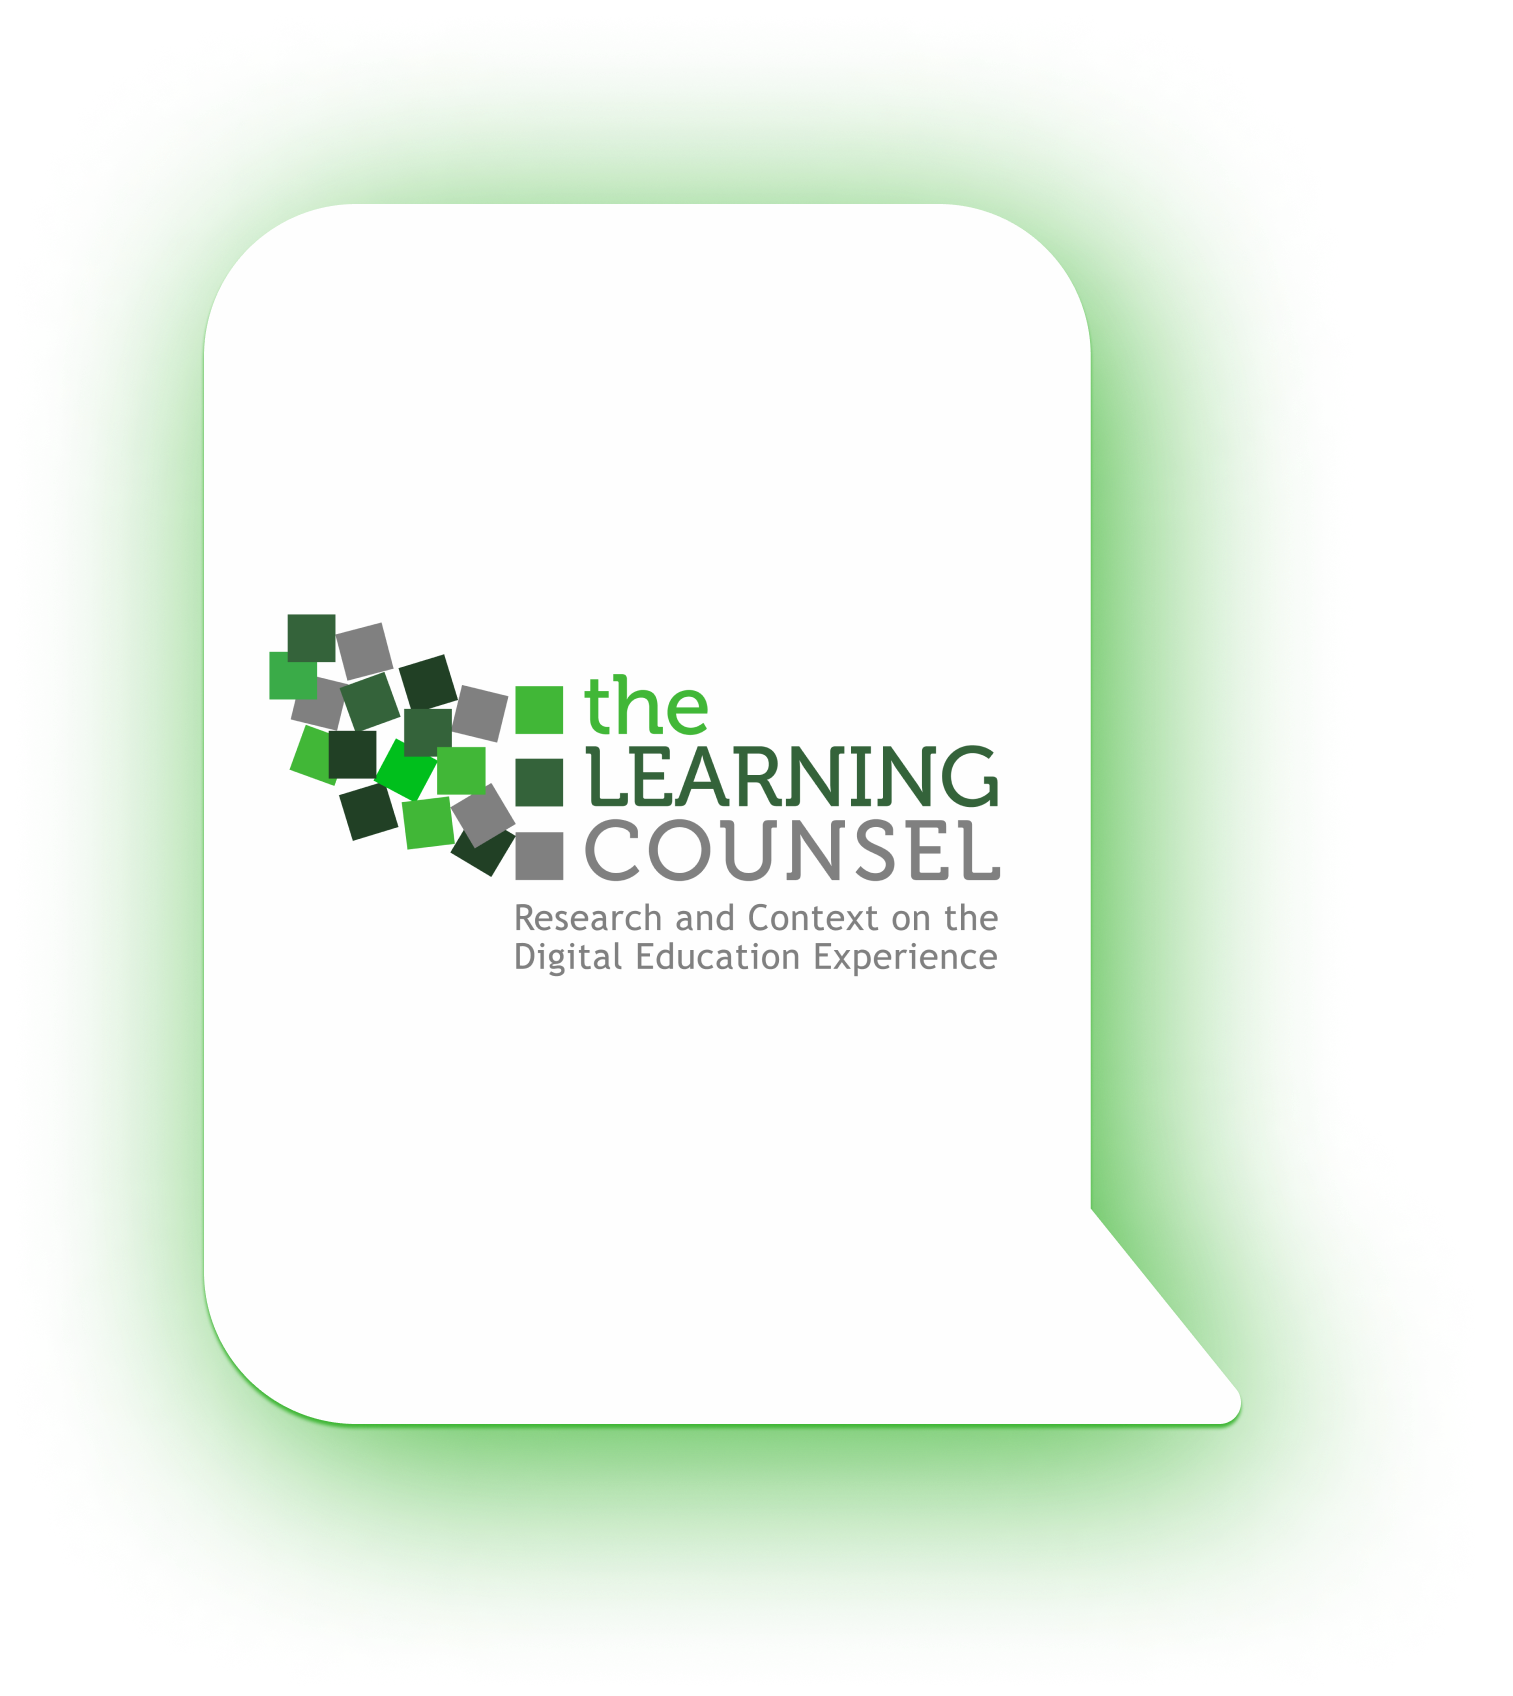 A competency-based portfolio assessment learning platform allowing teachers to evaluate learning